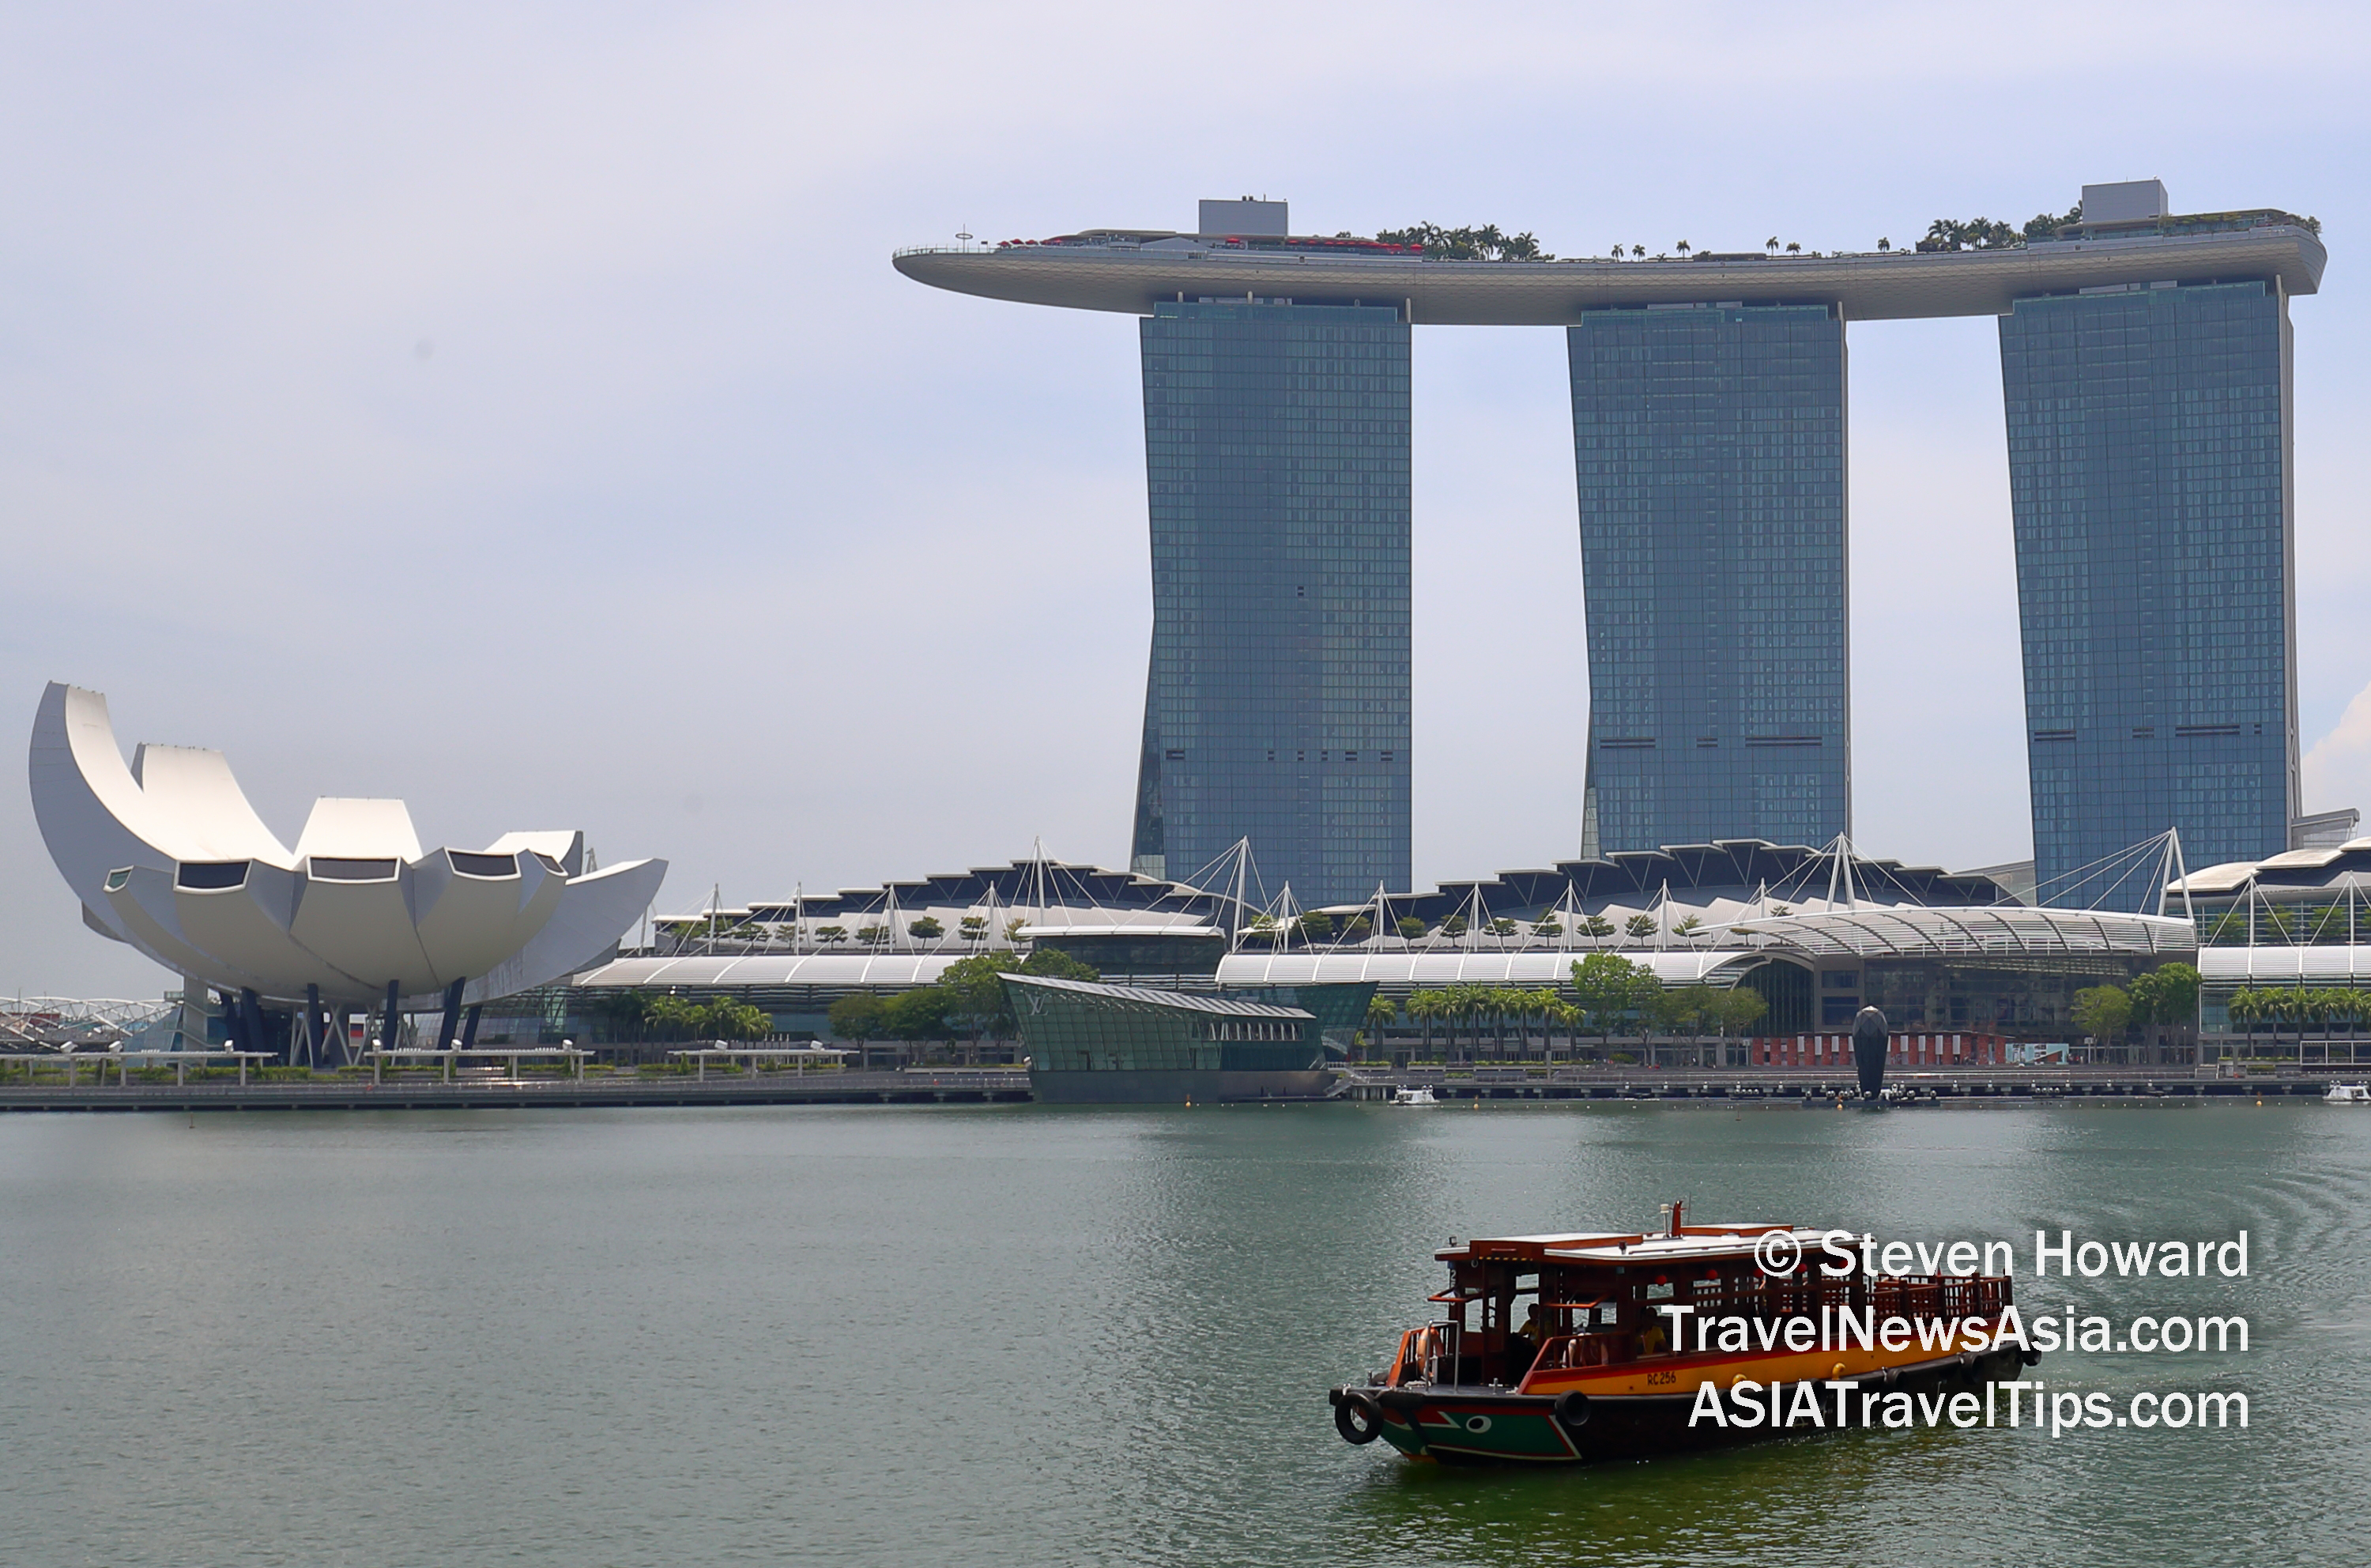 One of the most iconic hotels and cityscapes in the world, Marina Bay Sands in Singapore. Picture by Steven Howard of TravelNewsAsia.com Click to enlarge.